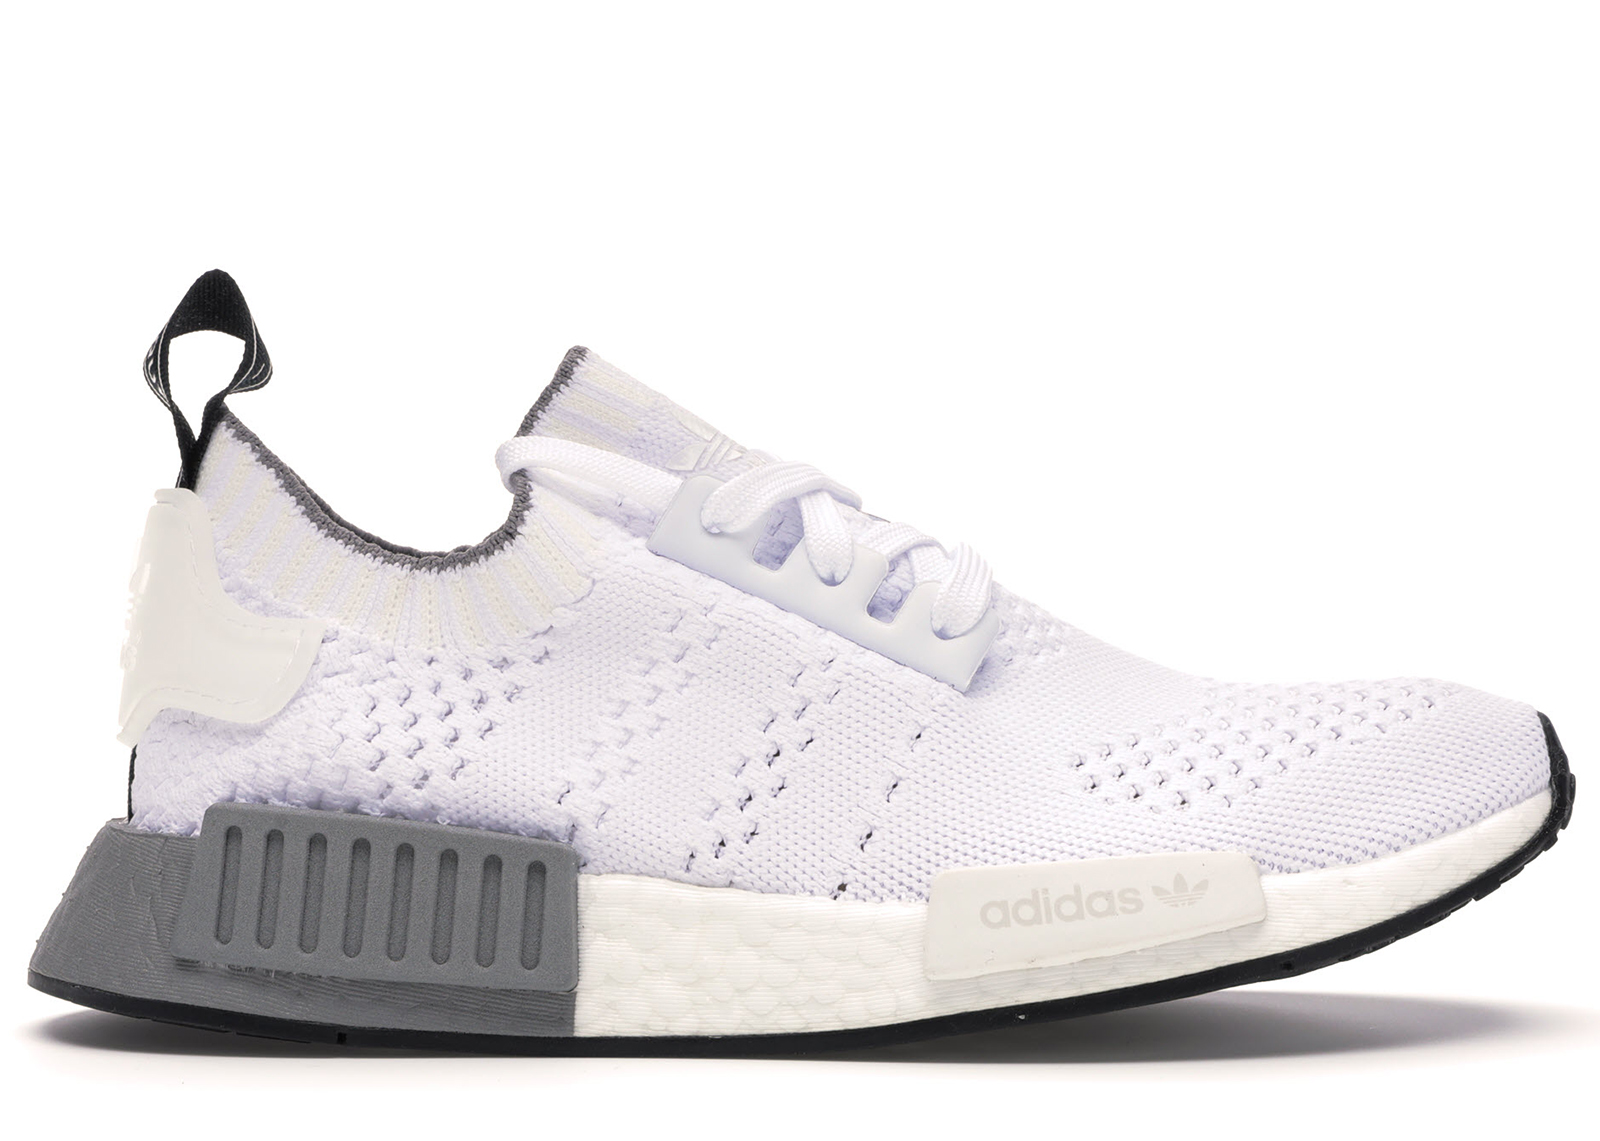 are adidas nmd good for running